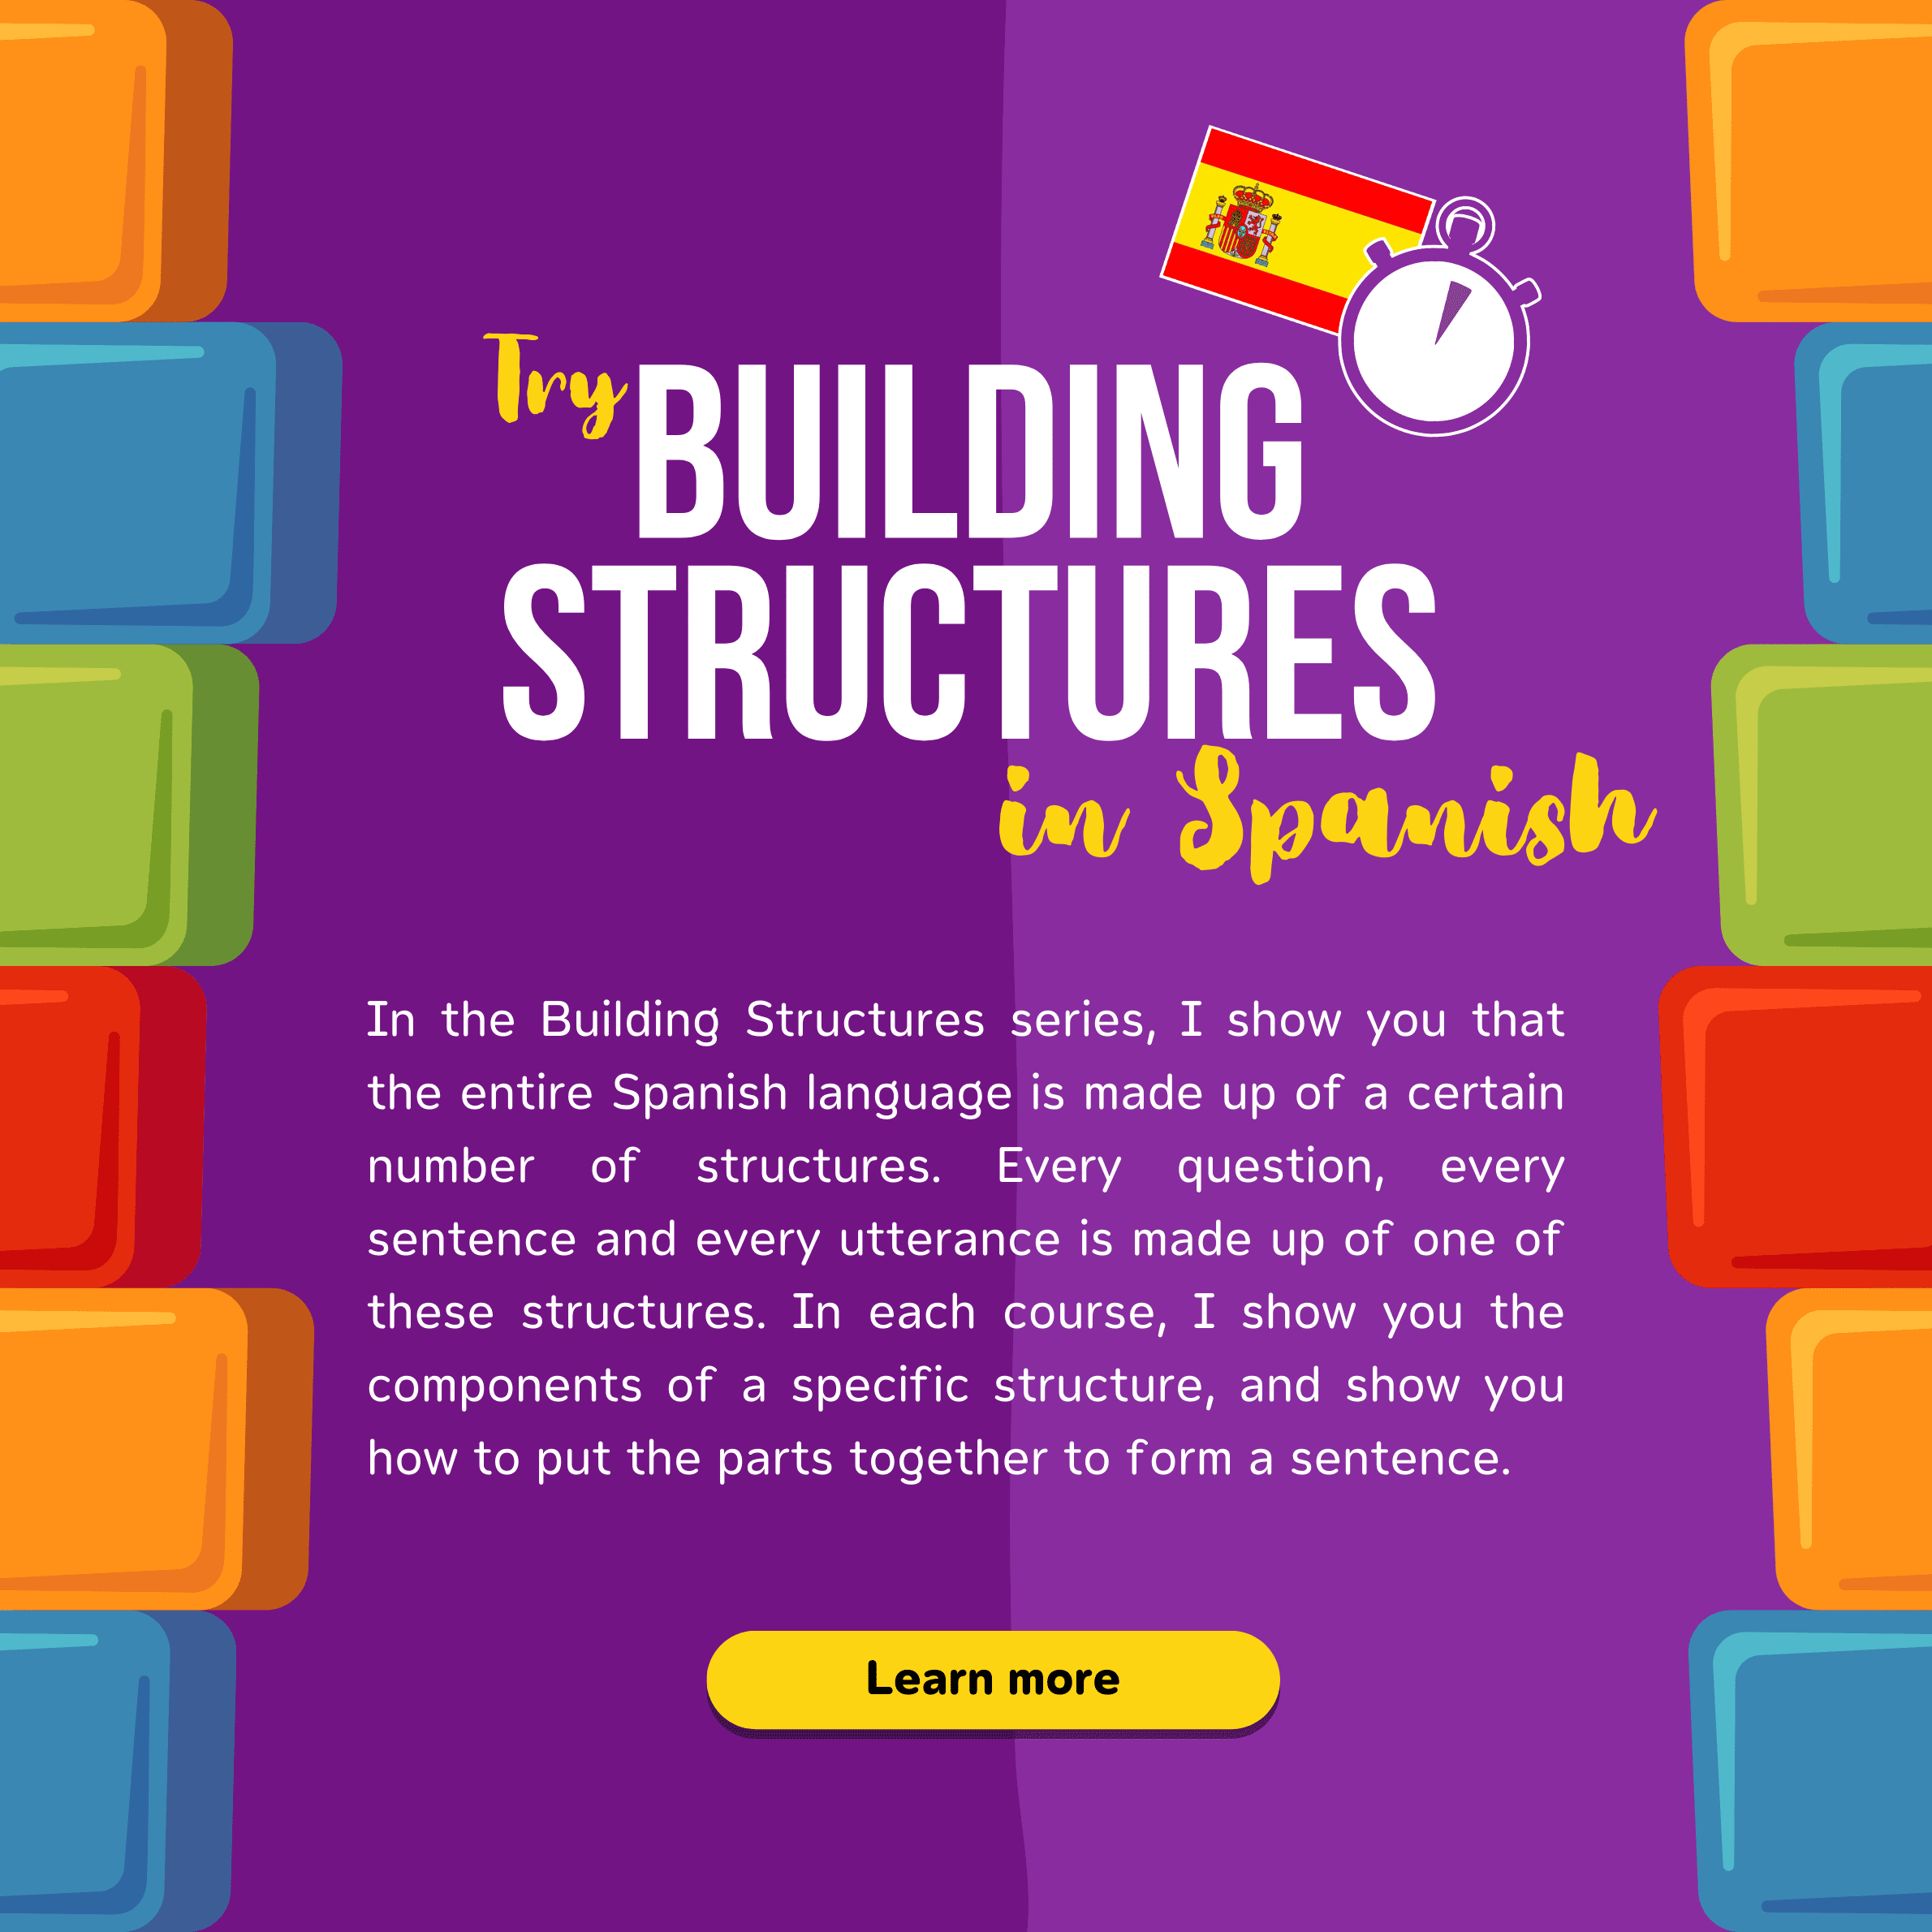 Try Building Structures in Spanish